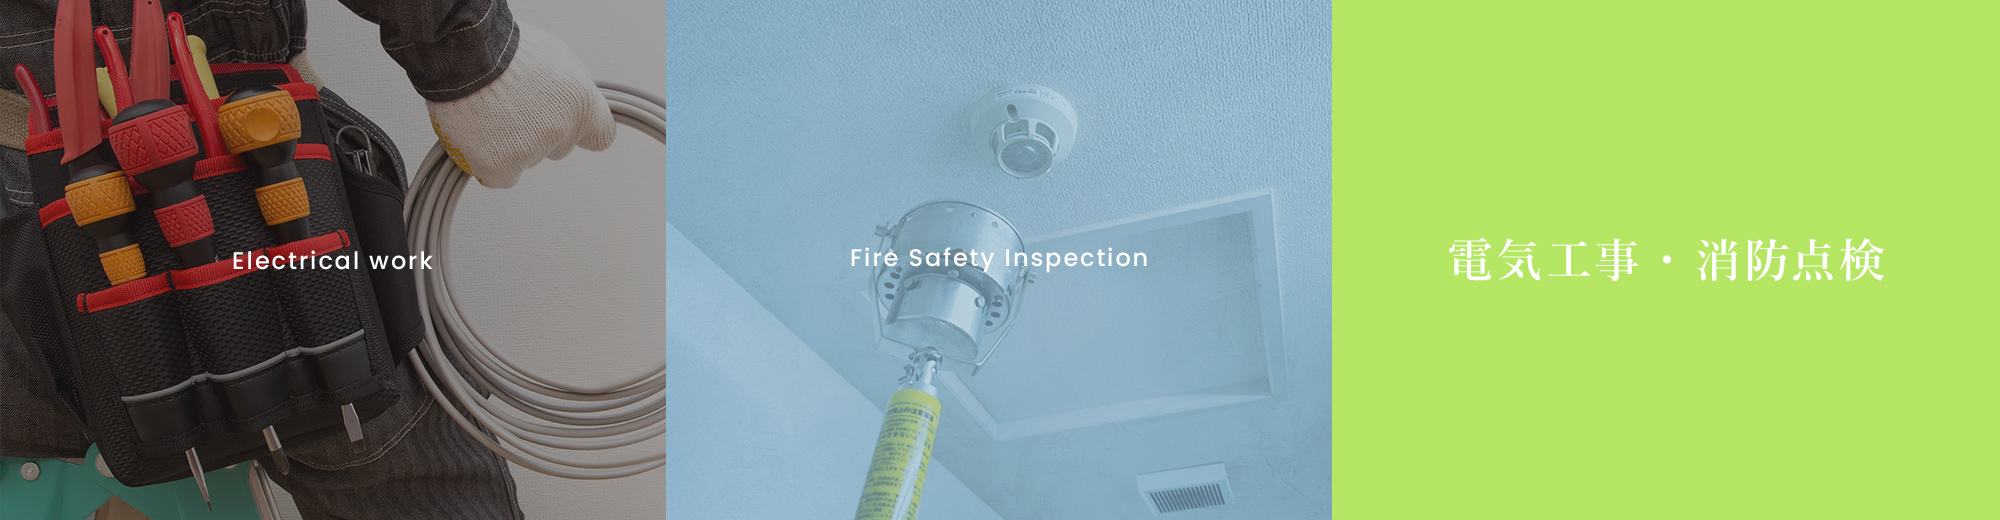 banner_electrical work_fire_inspection